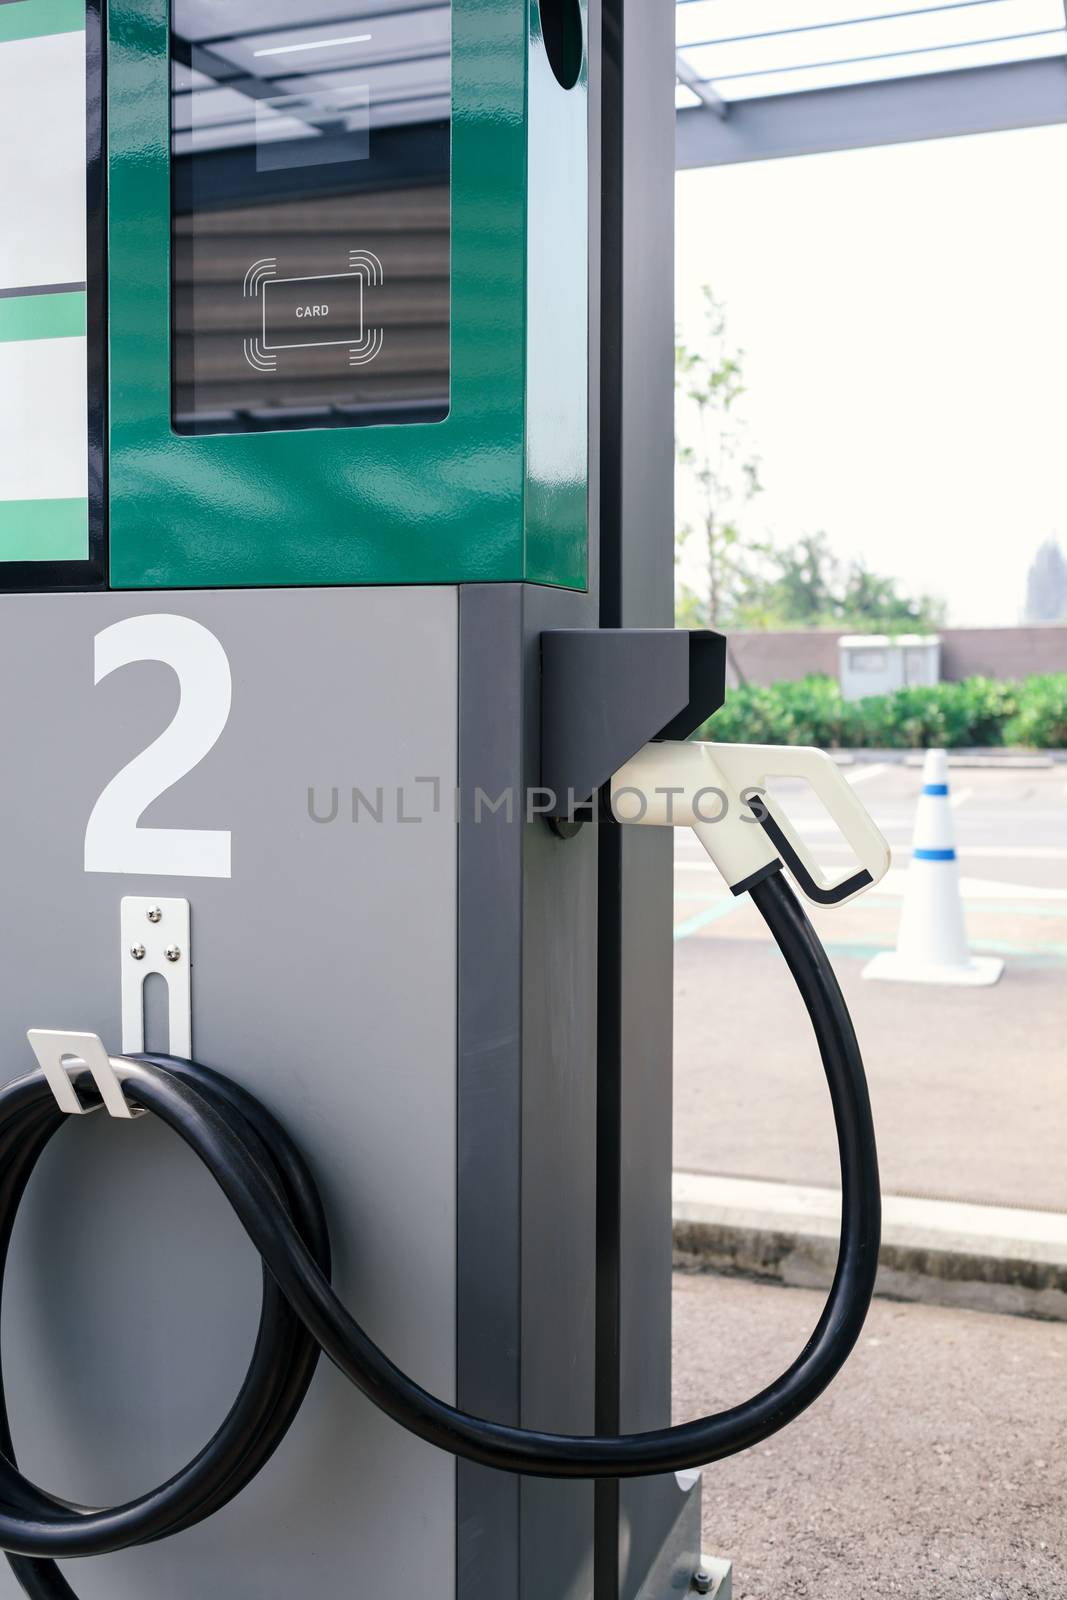 power supply connecter to plug-in electric vehicle or electric car at charging station in car park area of shopping plaza. charging technology for future automotive and city life.